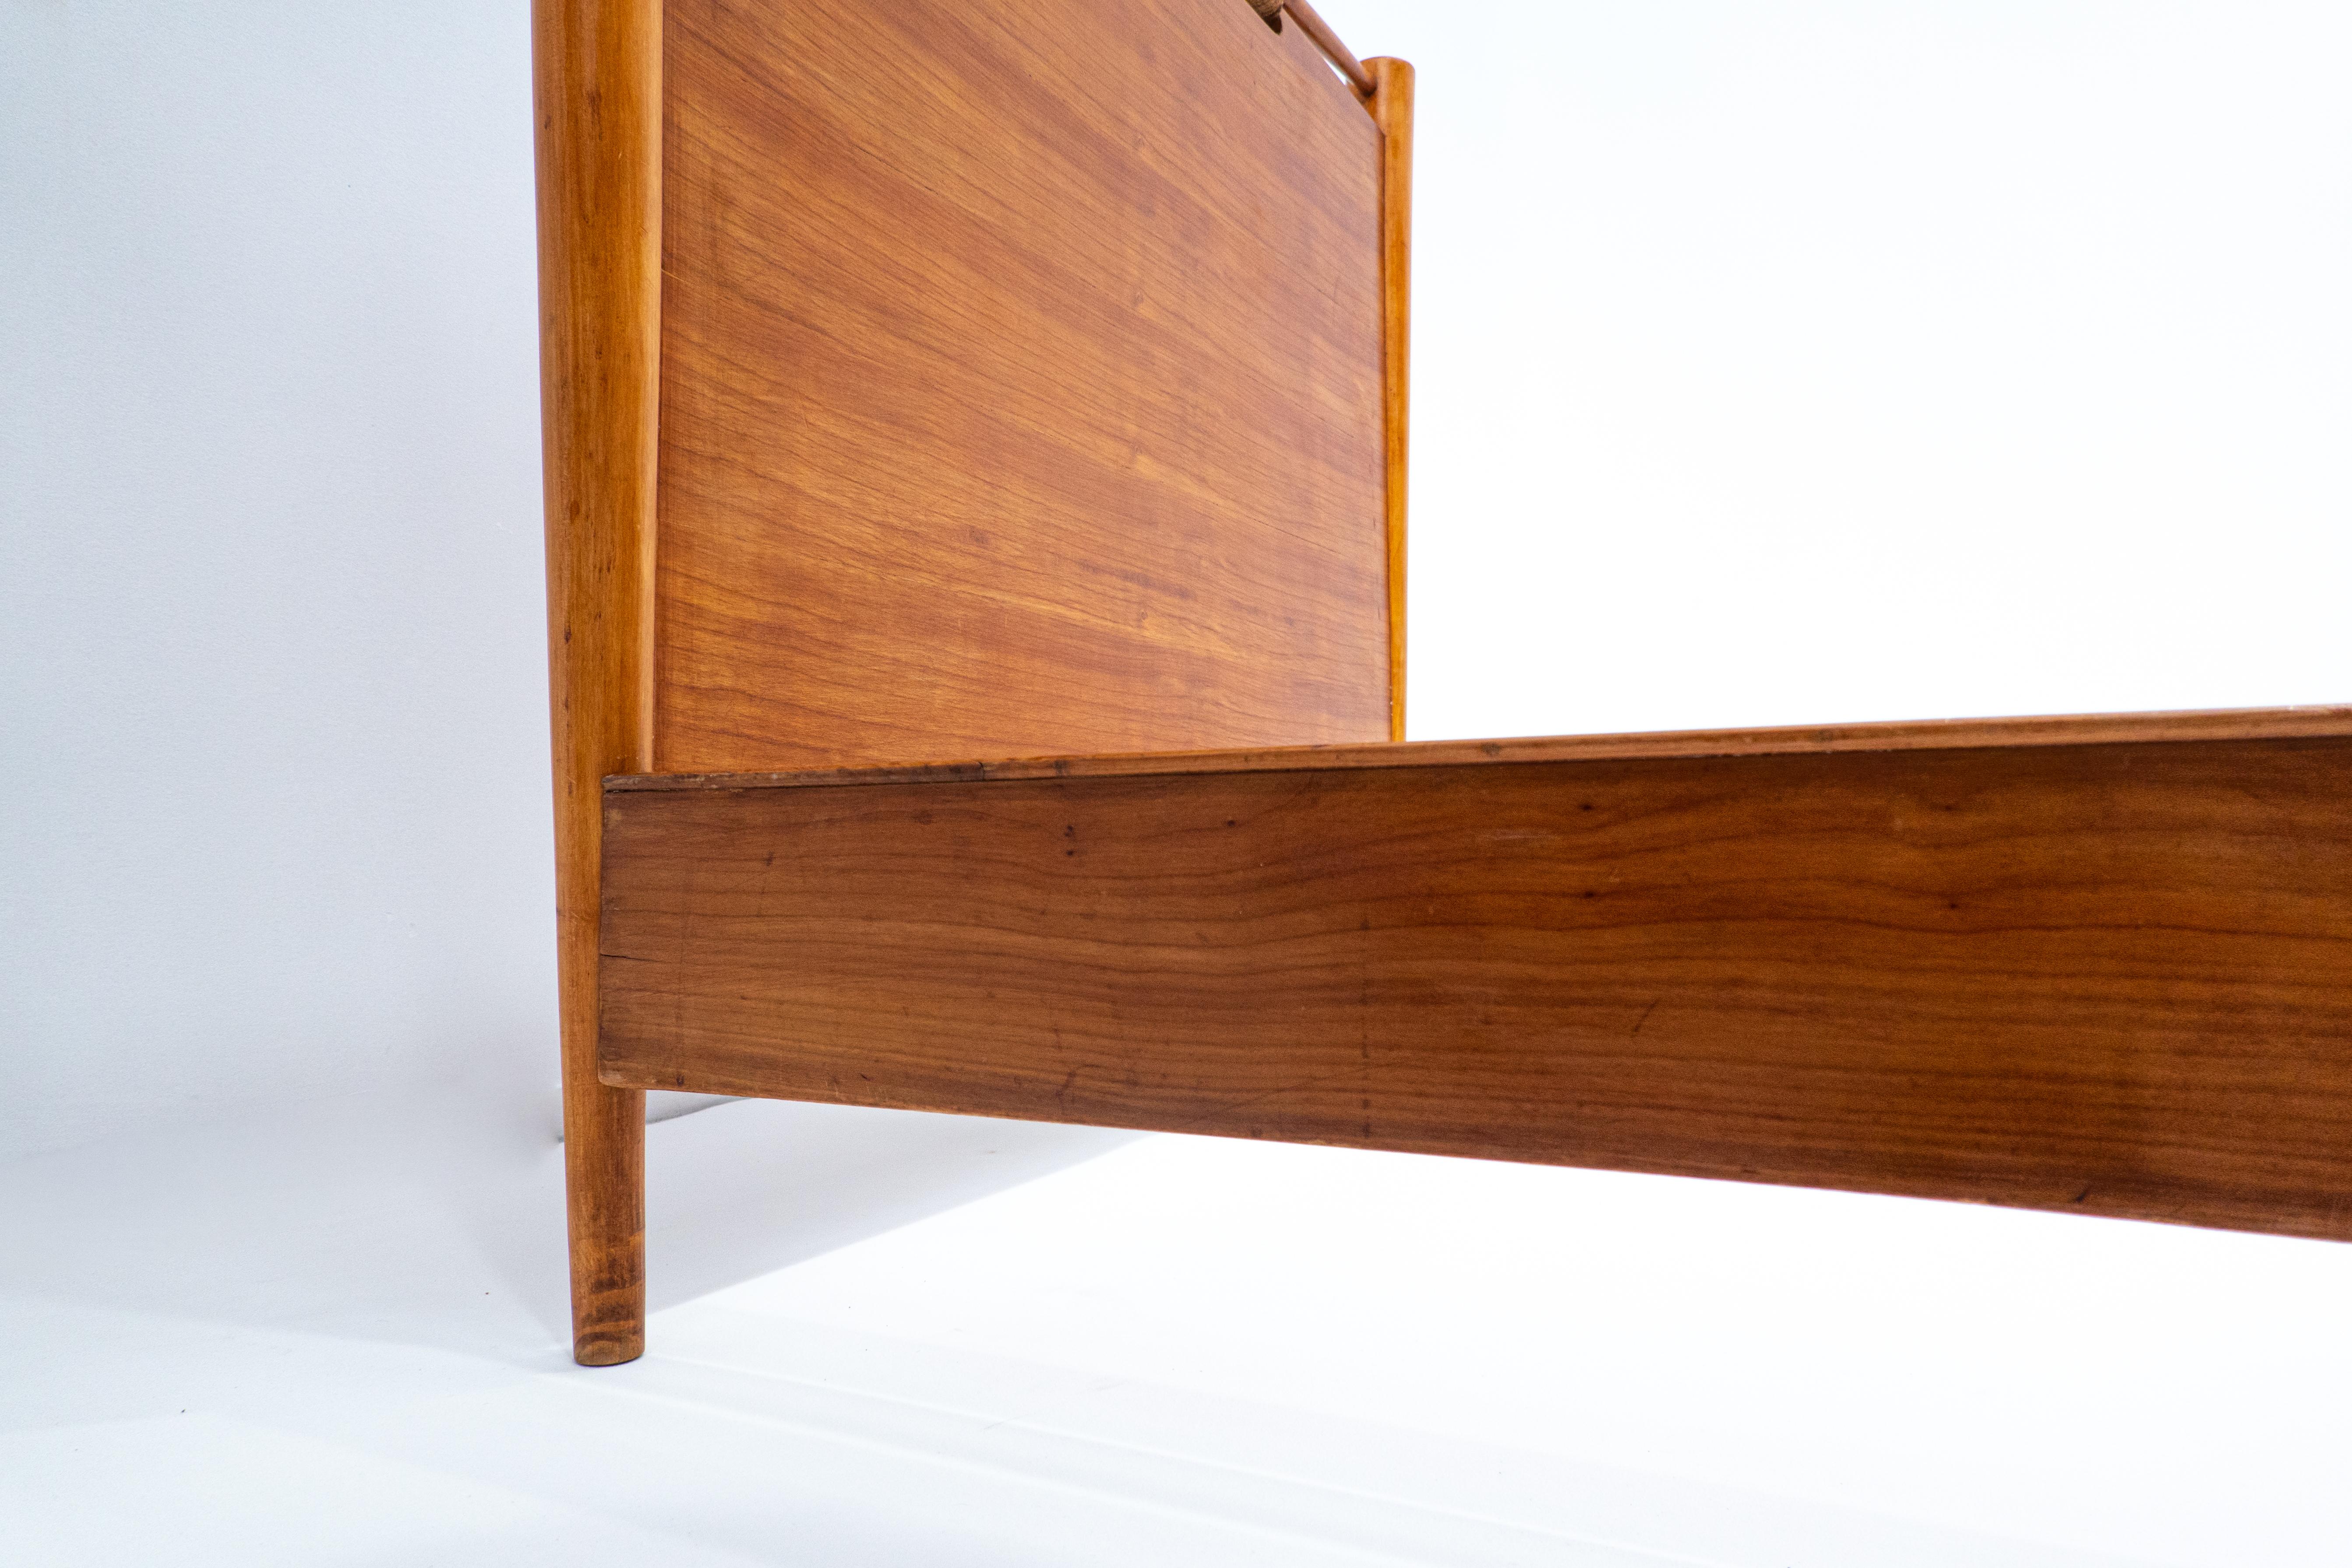 Pair of Beds Attributed to Guglielmo Pecorini, Cherry Wood, Italy, 1940s For Sale 5